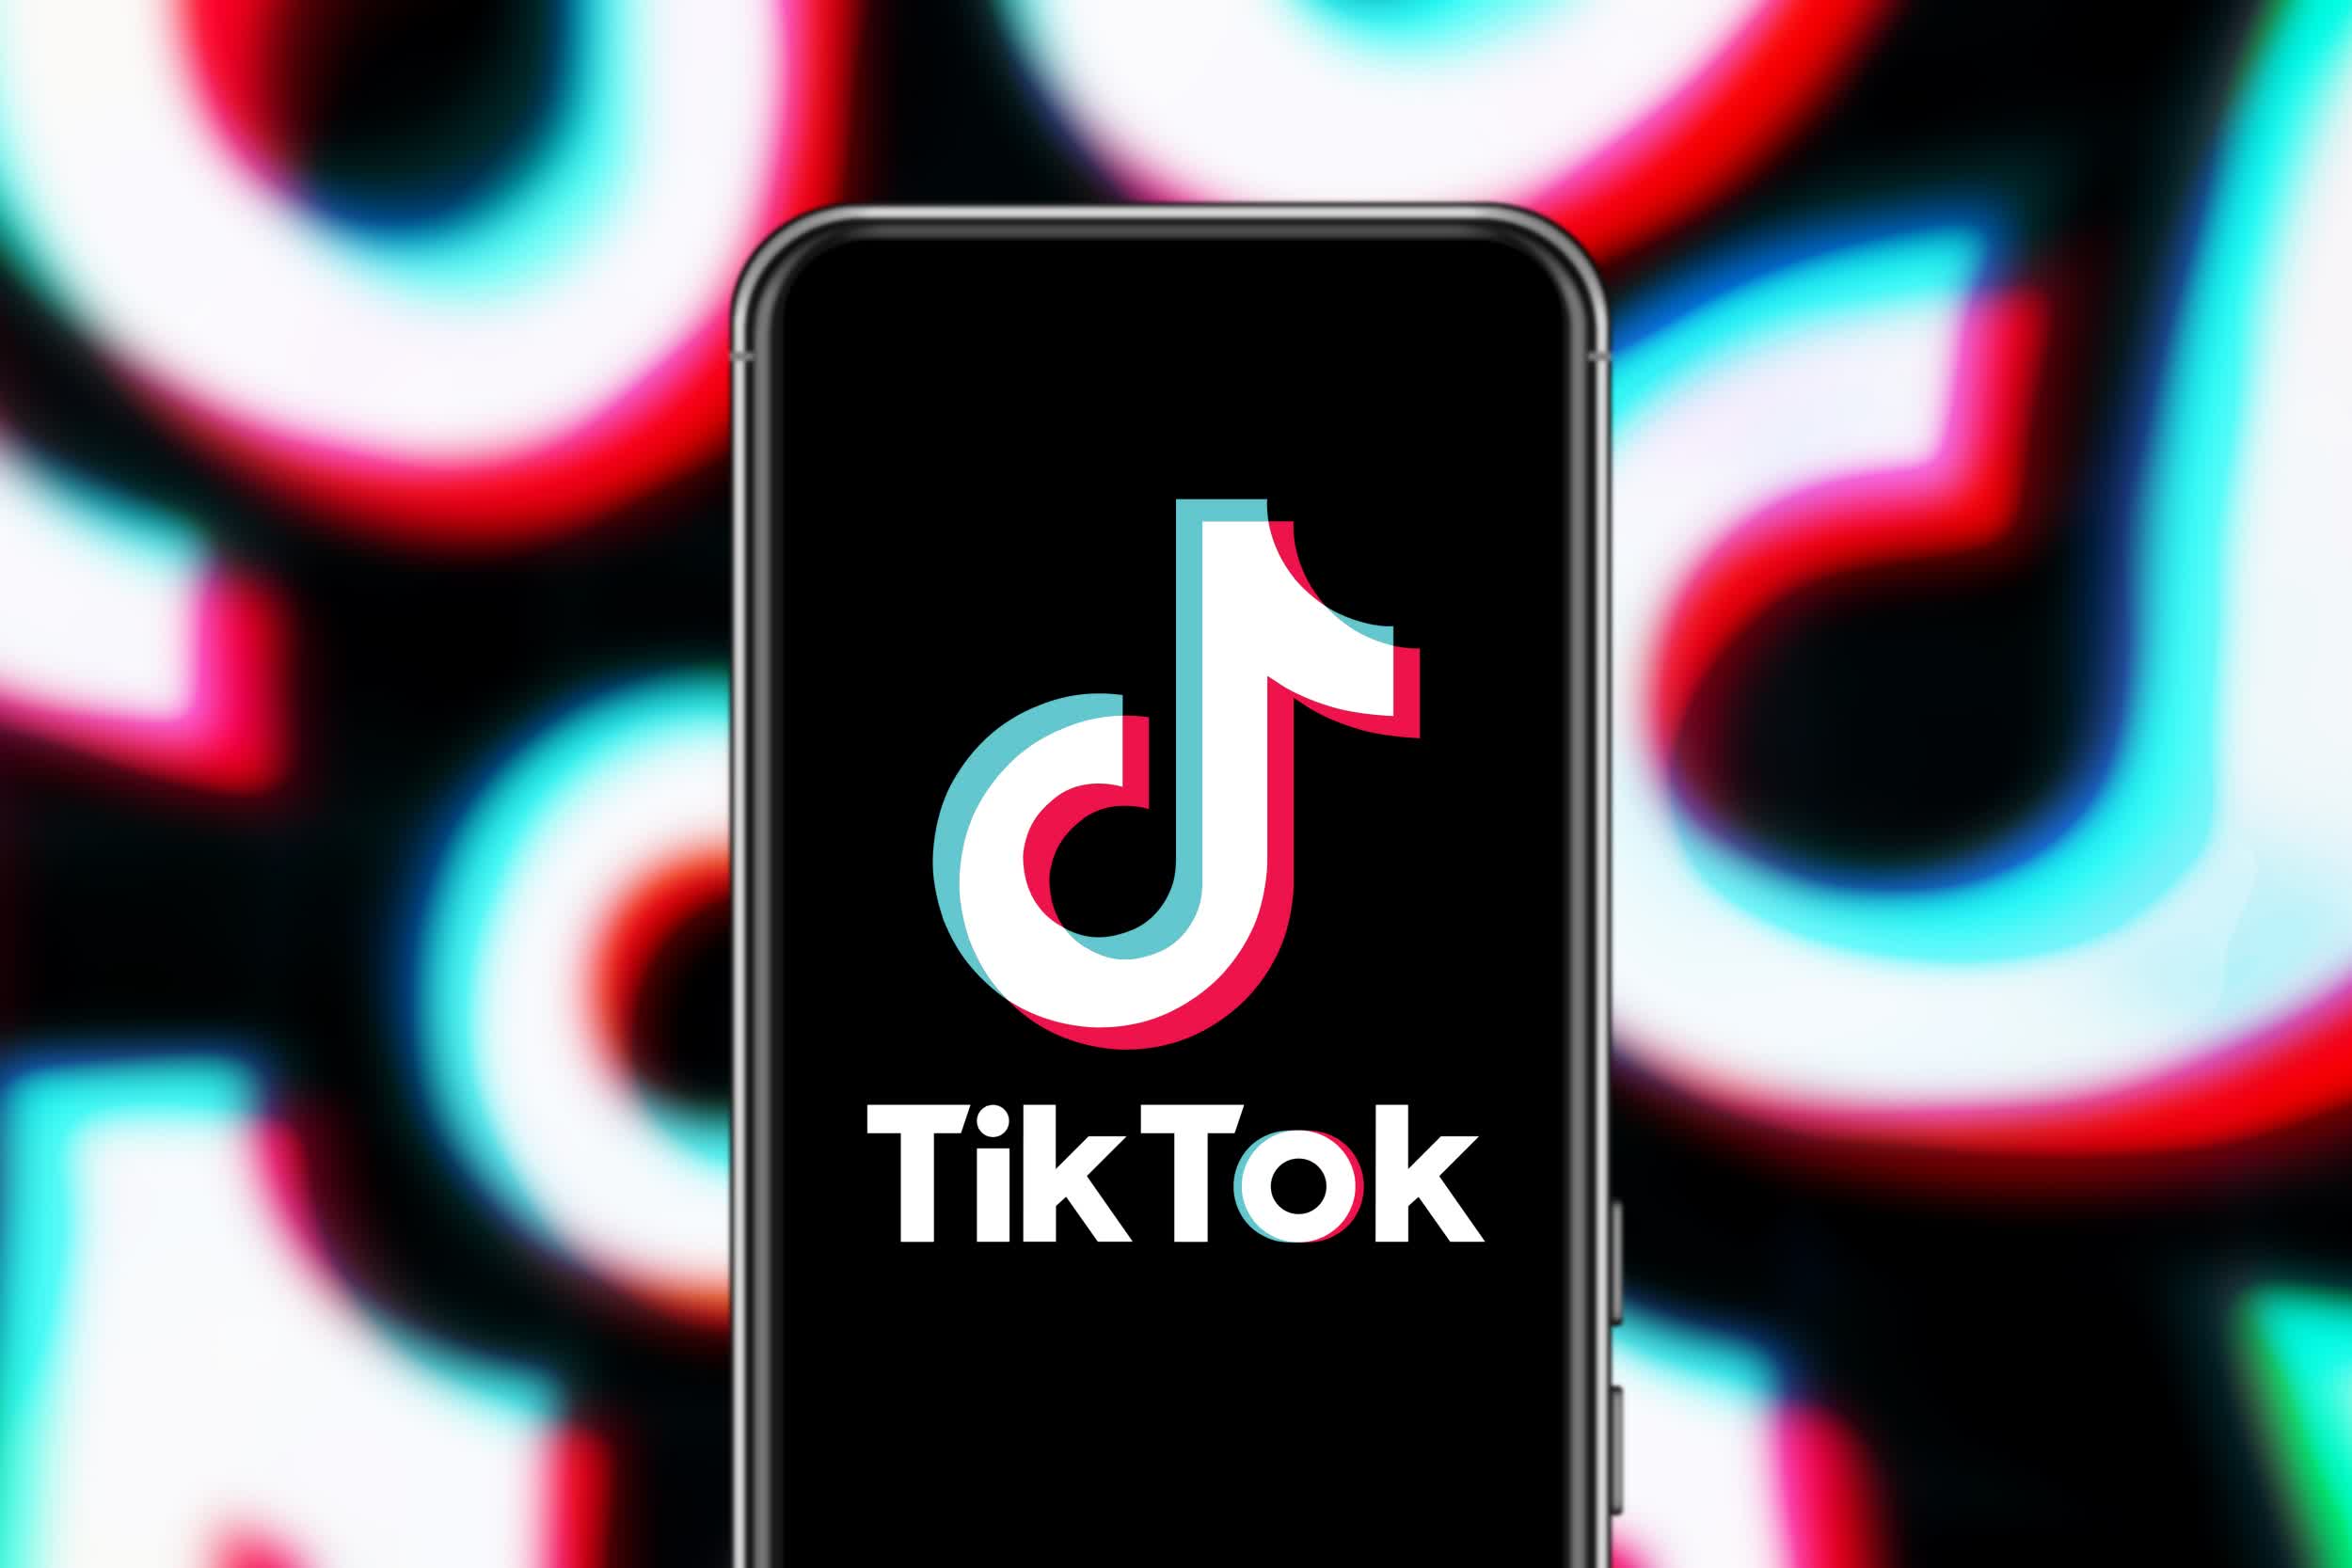 TikTok is approaching the issue of bullying from both sides